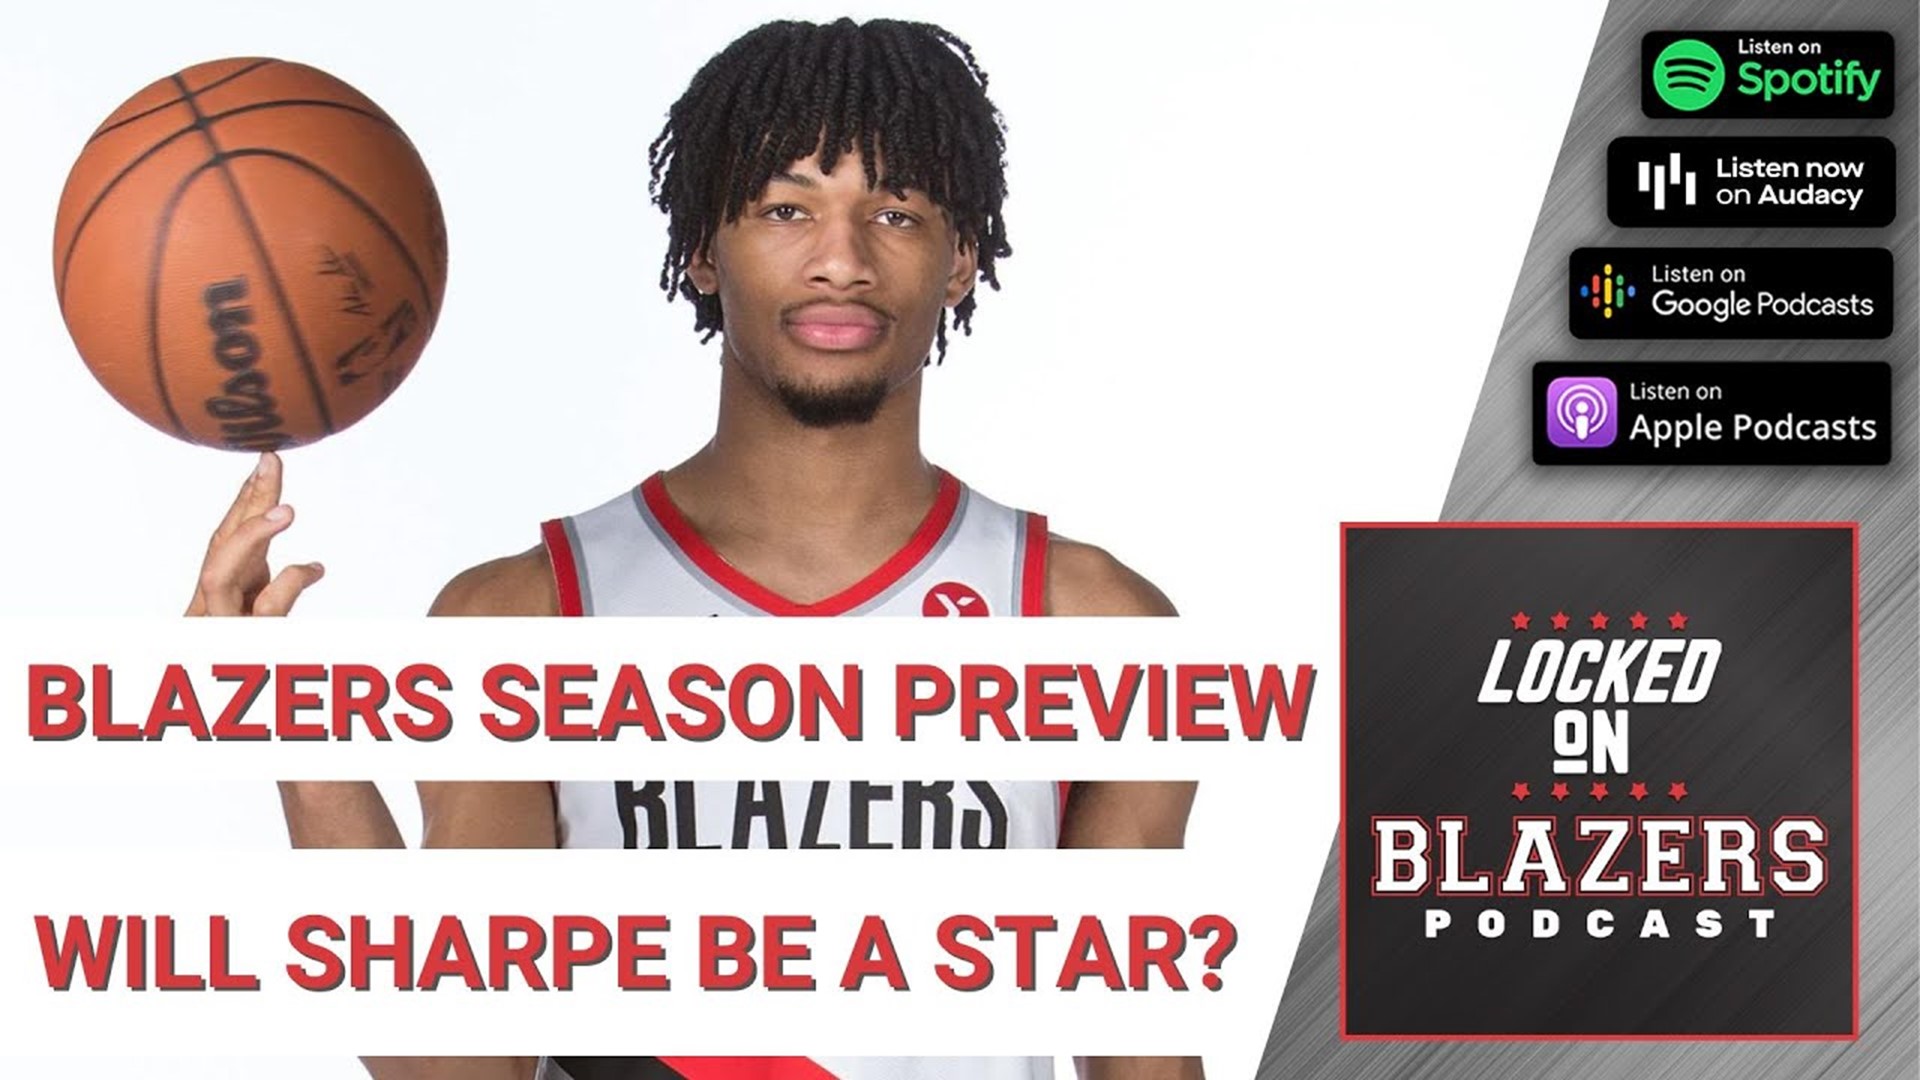 We take a look at Blazers rookie Shaedon Sharpe. What are his best- and worst-case scenarios, and most realistic role this season?